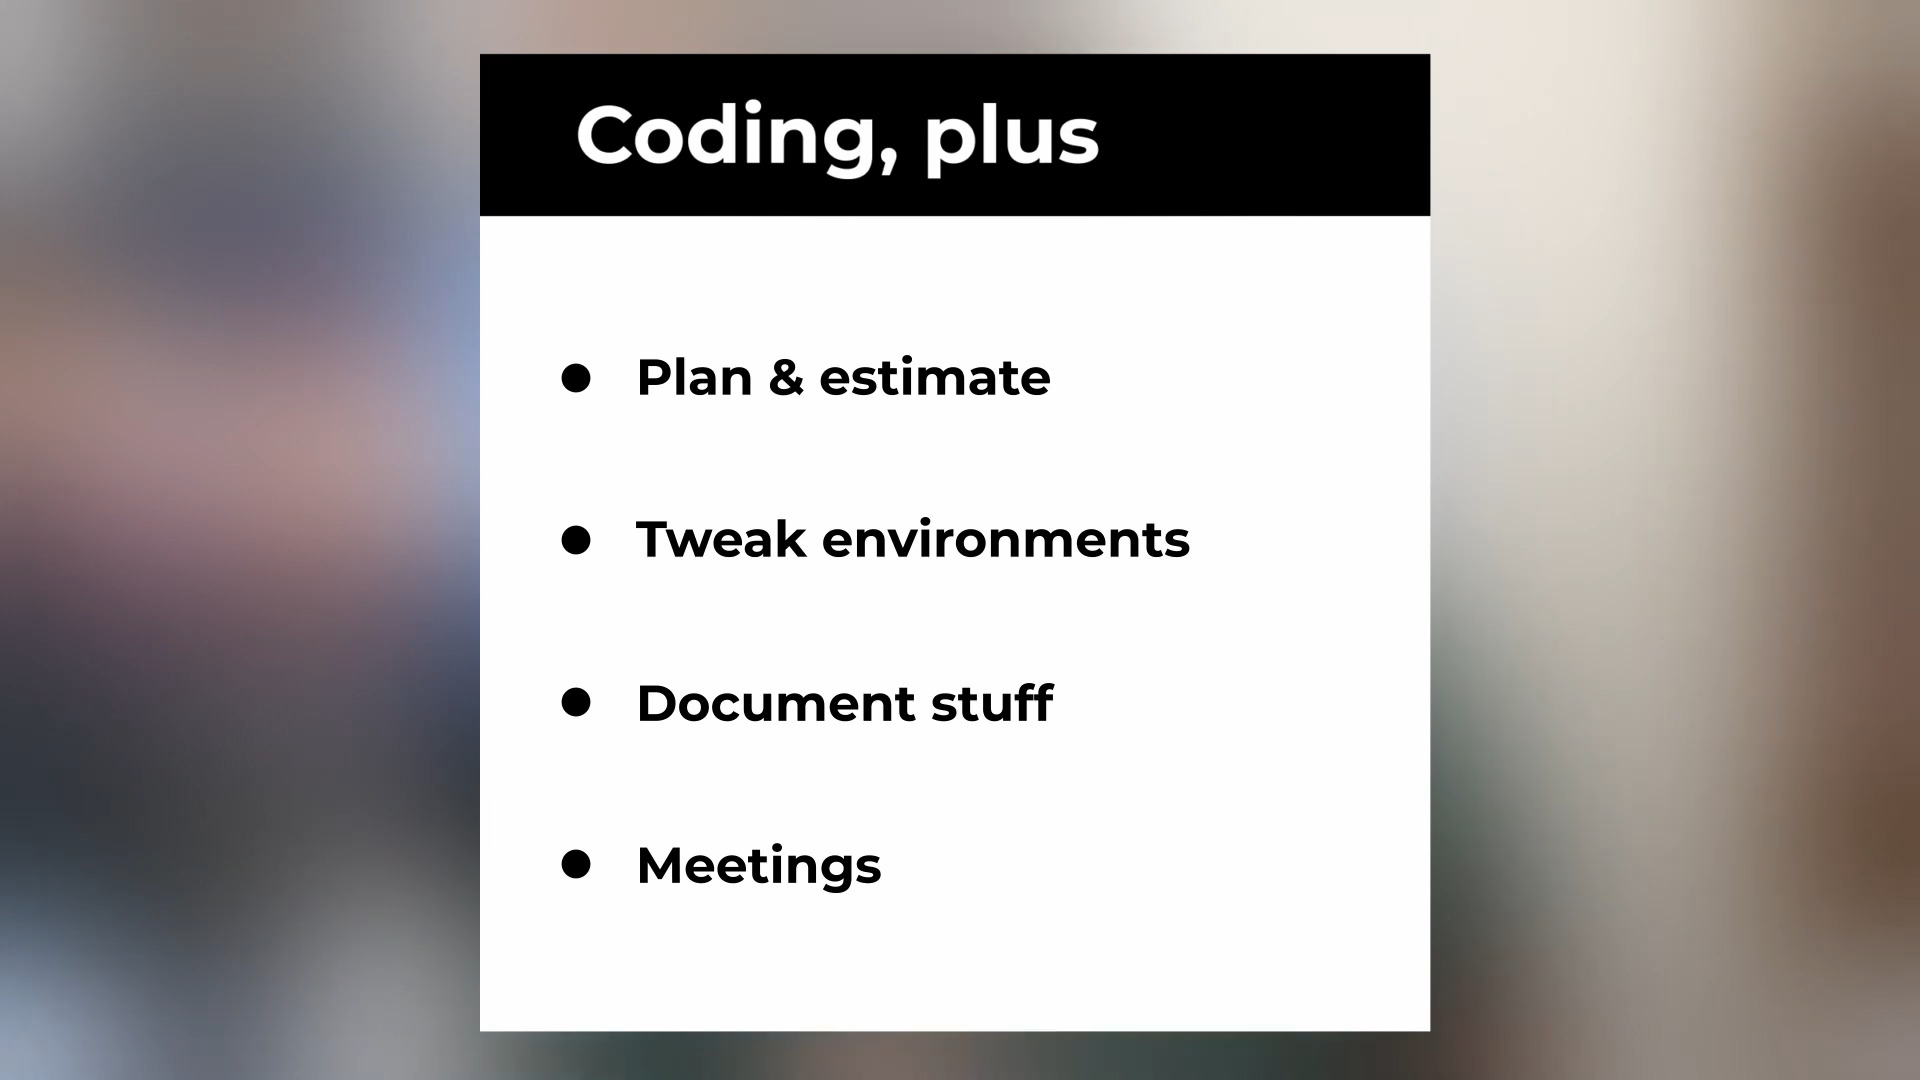 Tasks that commonly go along with coding